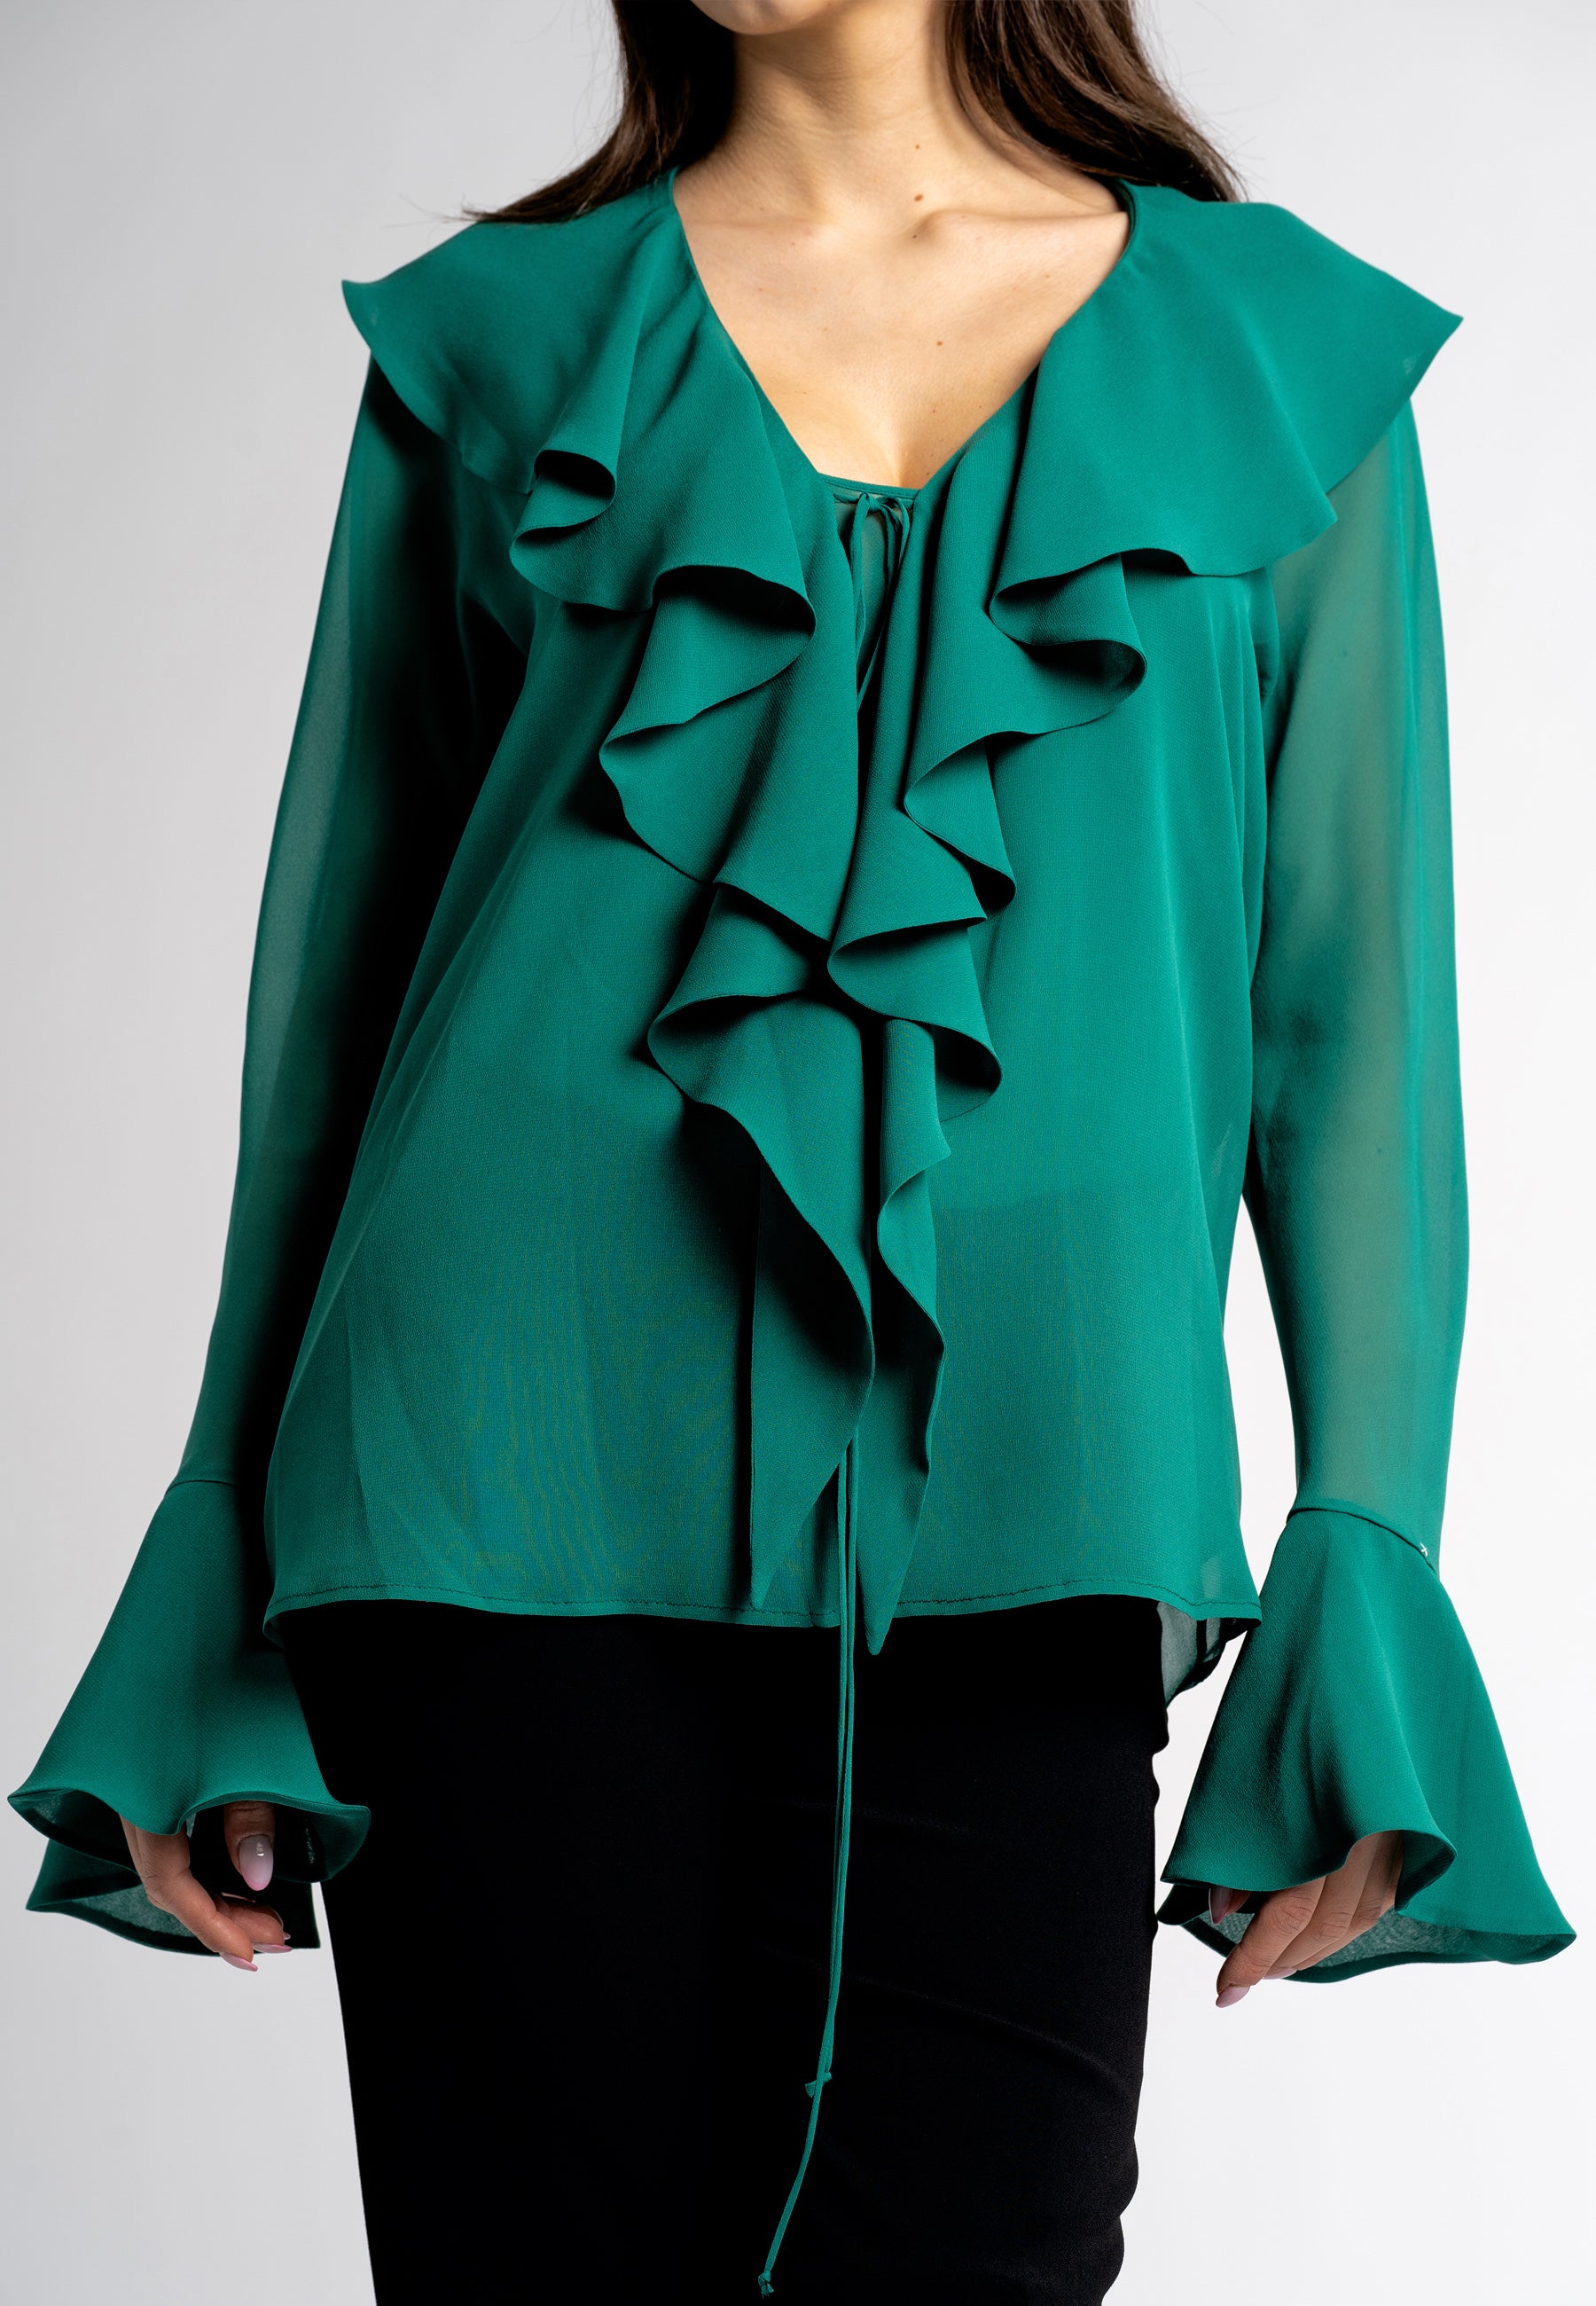 ruched shirt green ruffle  blouse  ruffle blouse long sleeve ruffled blouse green ruffle blouse  green ruffle tops  long sleeve ruffle tops  viscose ruffle top  ruffle sleeve blouse  green blouse  designer ruffle top maxi ruffle made in italy clothing sustainable clothing australia  ethical australian clothing  sustainable dresses australia 